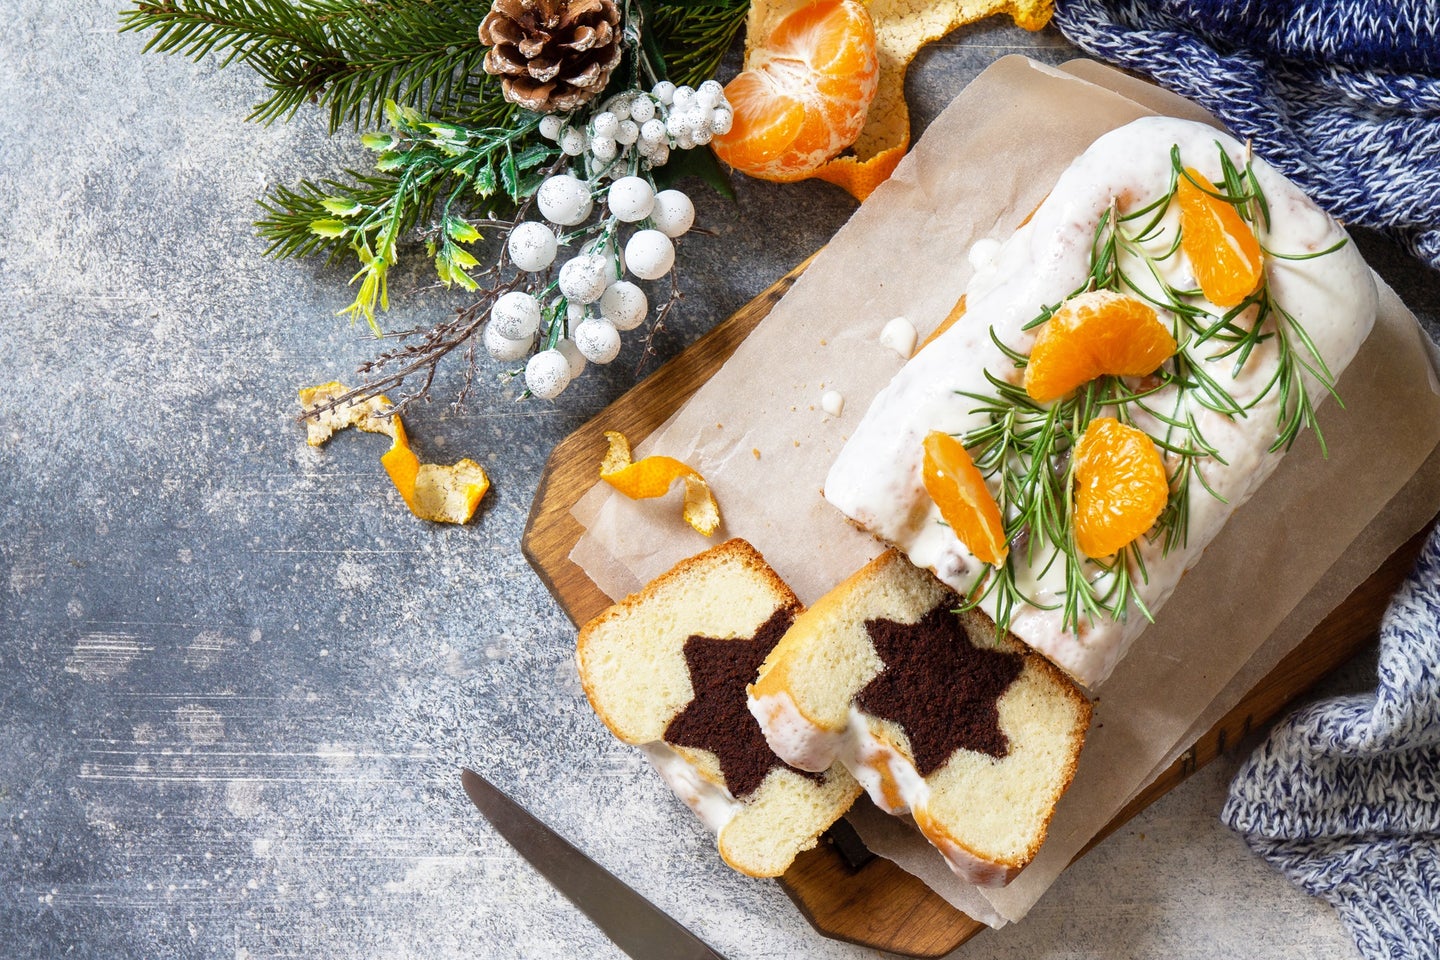 Holiday cake filled with chocolate stars, icing, and orange slices poses a sugary nightmare to people with diabetes